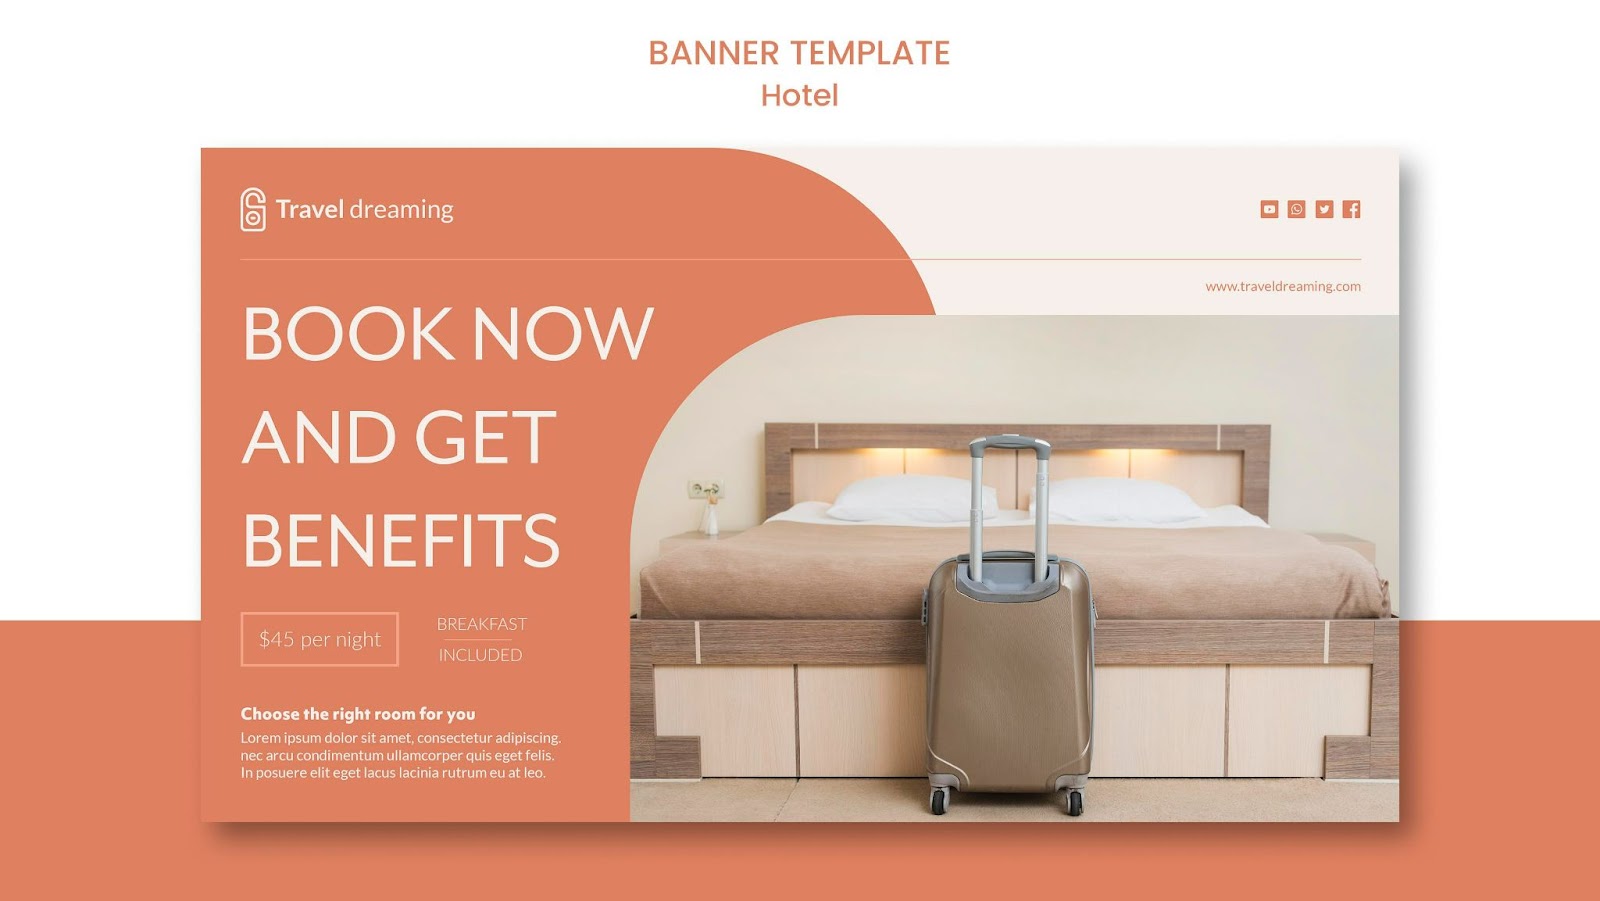 Hotel upselling with incentives